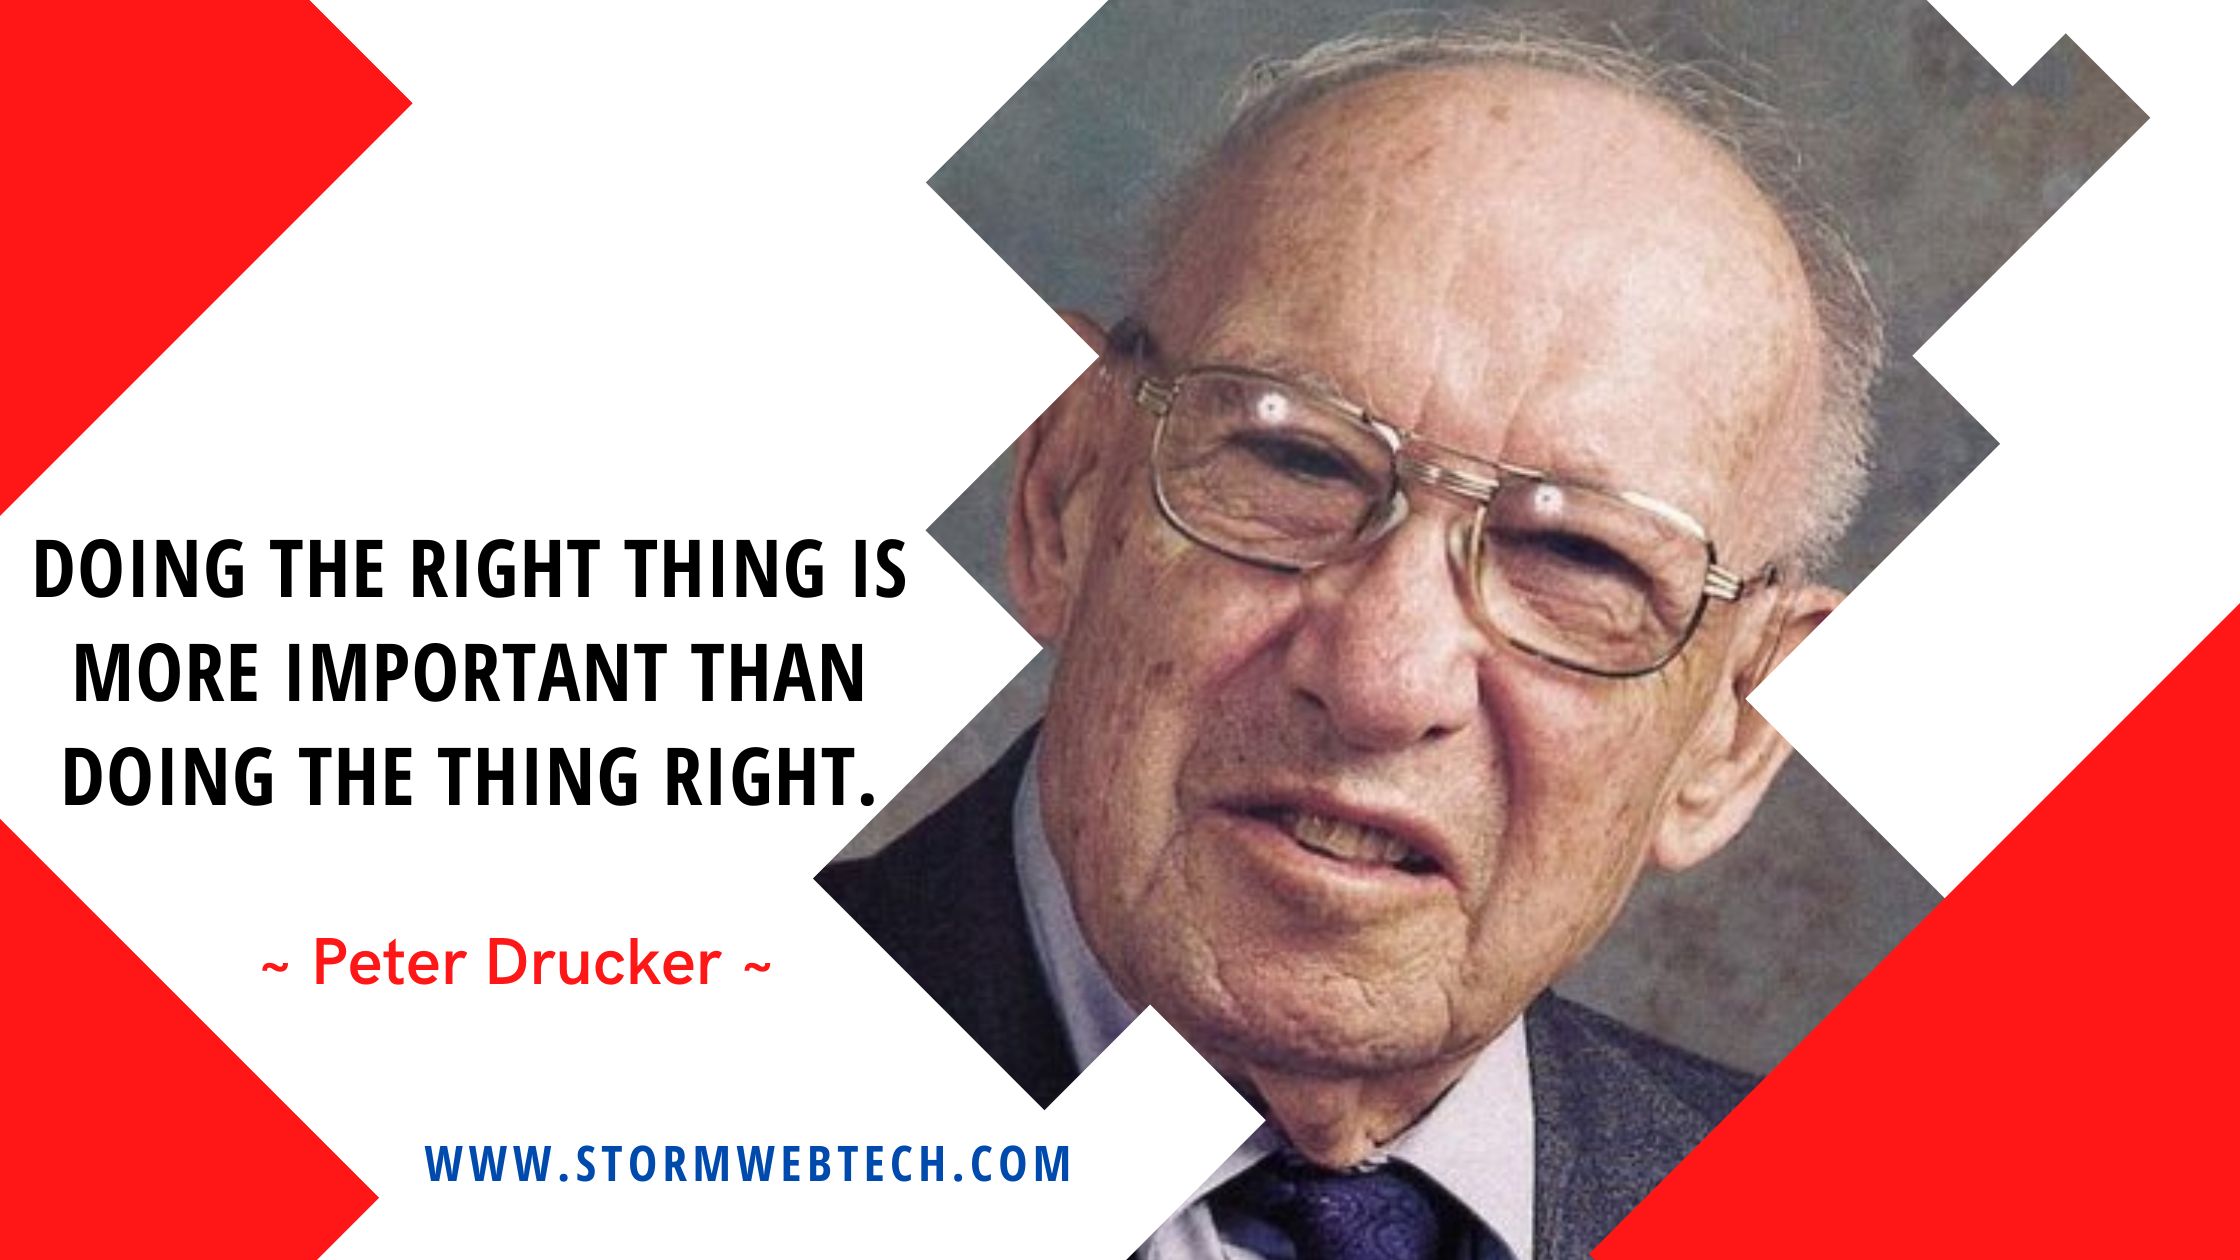 famous Quotes Of Peter Drucker In English, Famous Quotes By Peter Drucker, Peter Drucker Quotes In English, Peter Drucker Motivational Quotes